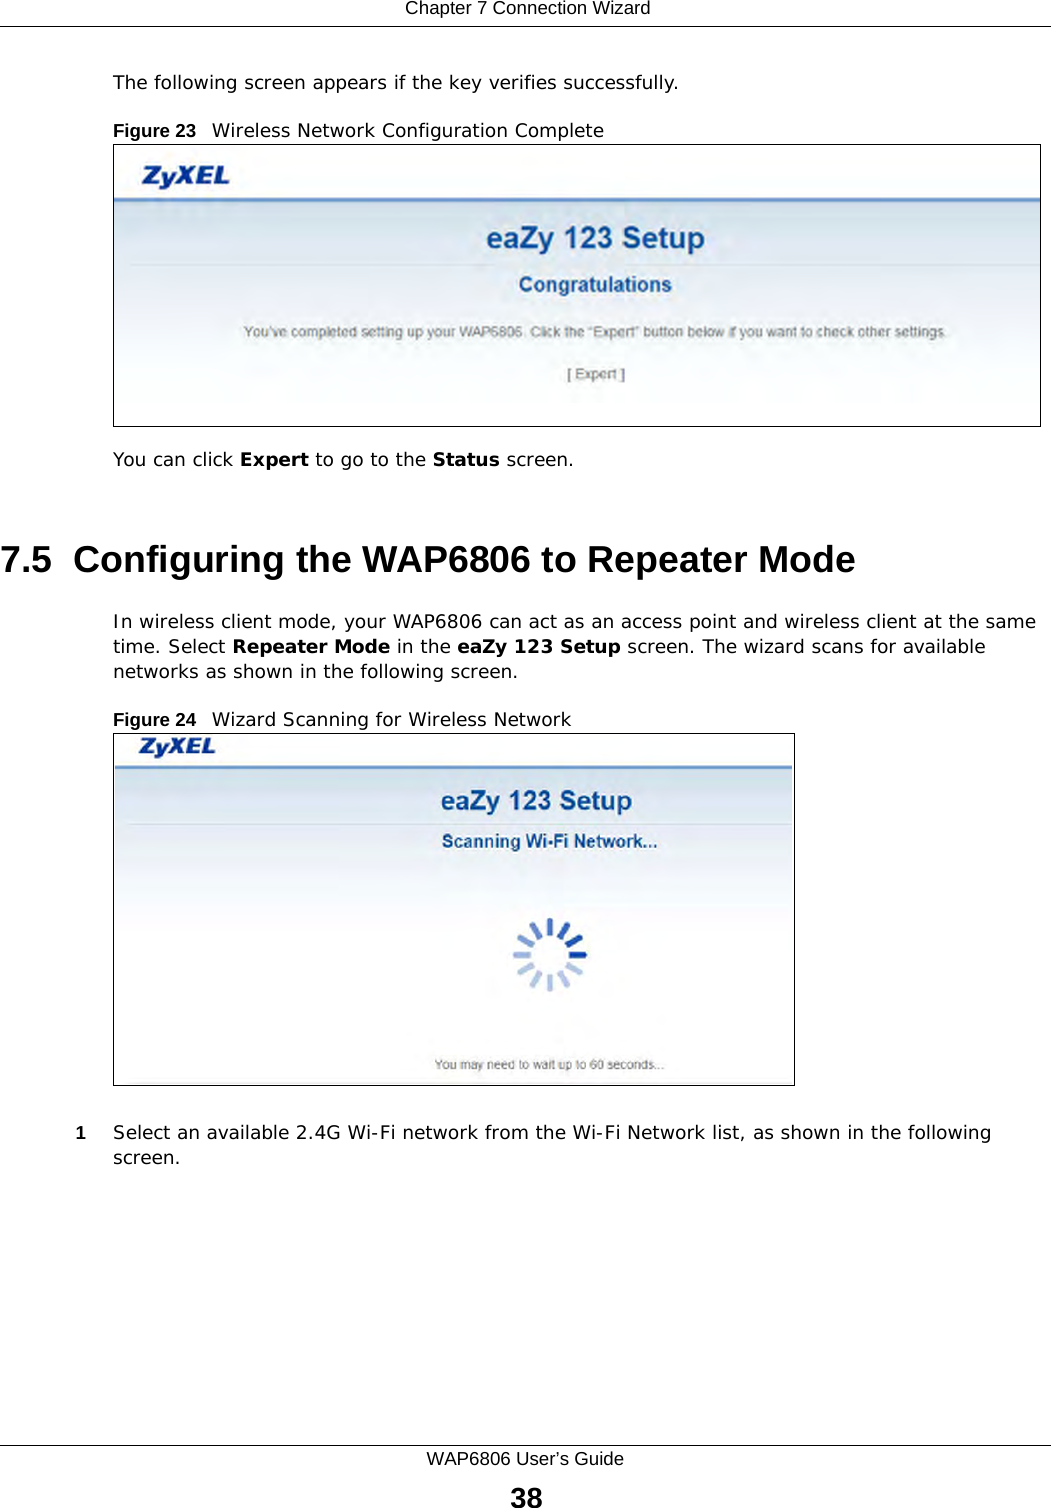  Chapter 7 Connection WizardWAP6806 User’s Guide38The following screen appears if the key verifies successfully.Figure 23   Wireless Network Configuration CompleteYou can click Expert to go to the Status screen.7.5  Configuring the WAP6806 to Repeater ModeIn wireless client mode, your WAP6806 can act as an access point and wireless client at the same time. Select Repeater Mode in the eaZy 123 Setup screen. The wizard scans for available networks as shown in the following screen. Figure 24   Wizard Scanning for Wireless Network1Select an available 2.4G Wi-Fi network from the Wi-Fi Network list, as shown in the following screen.